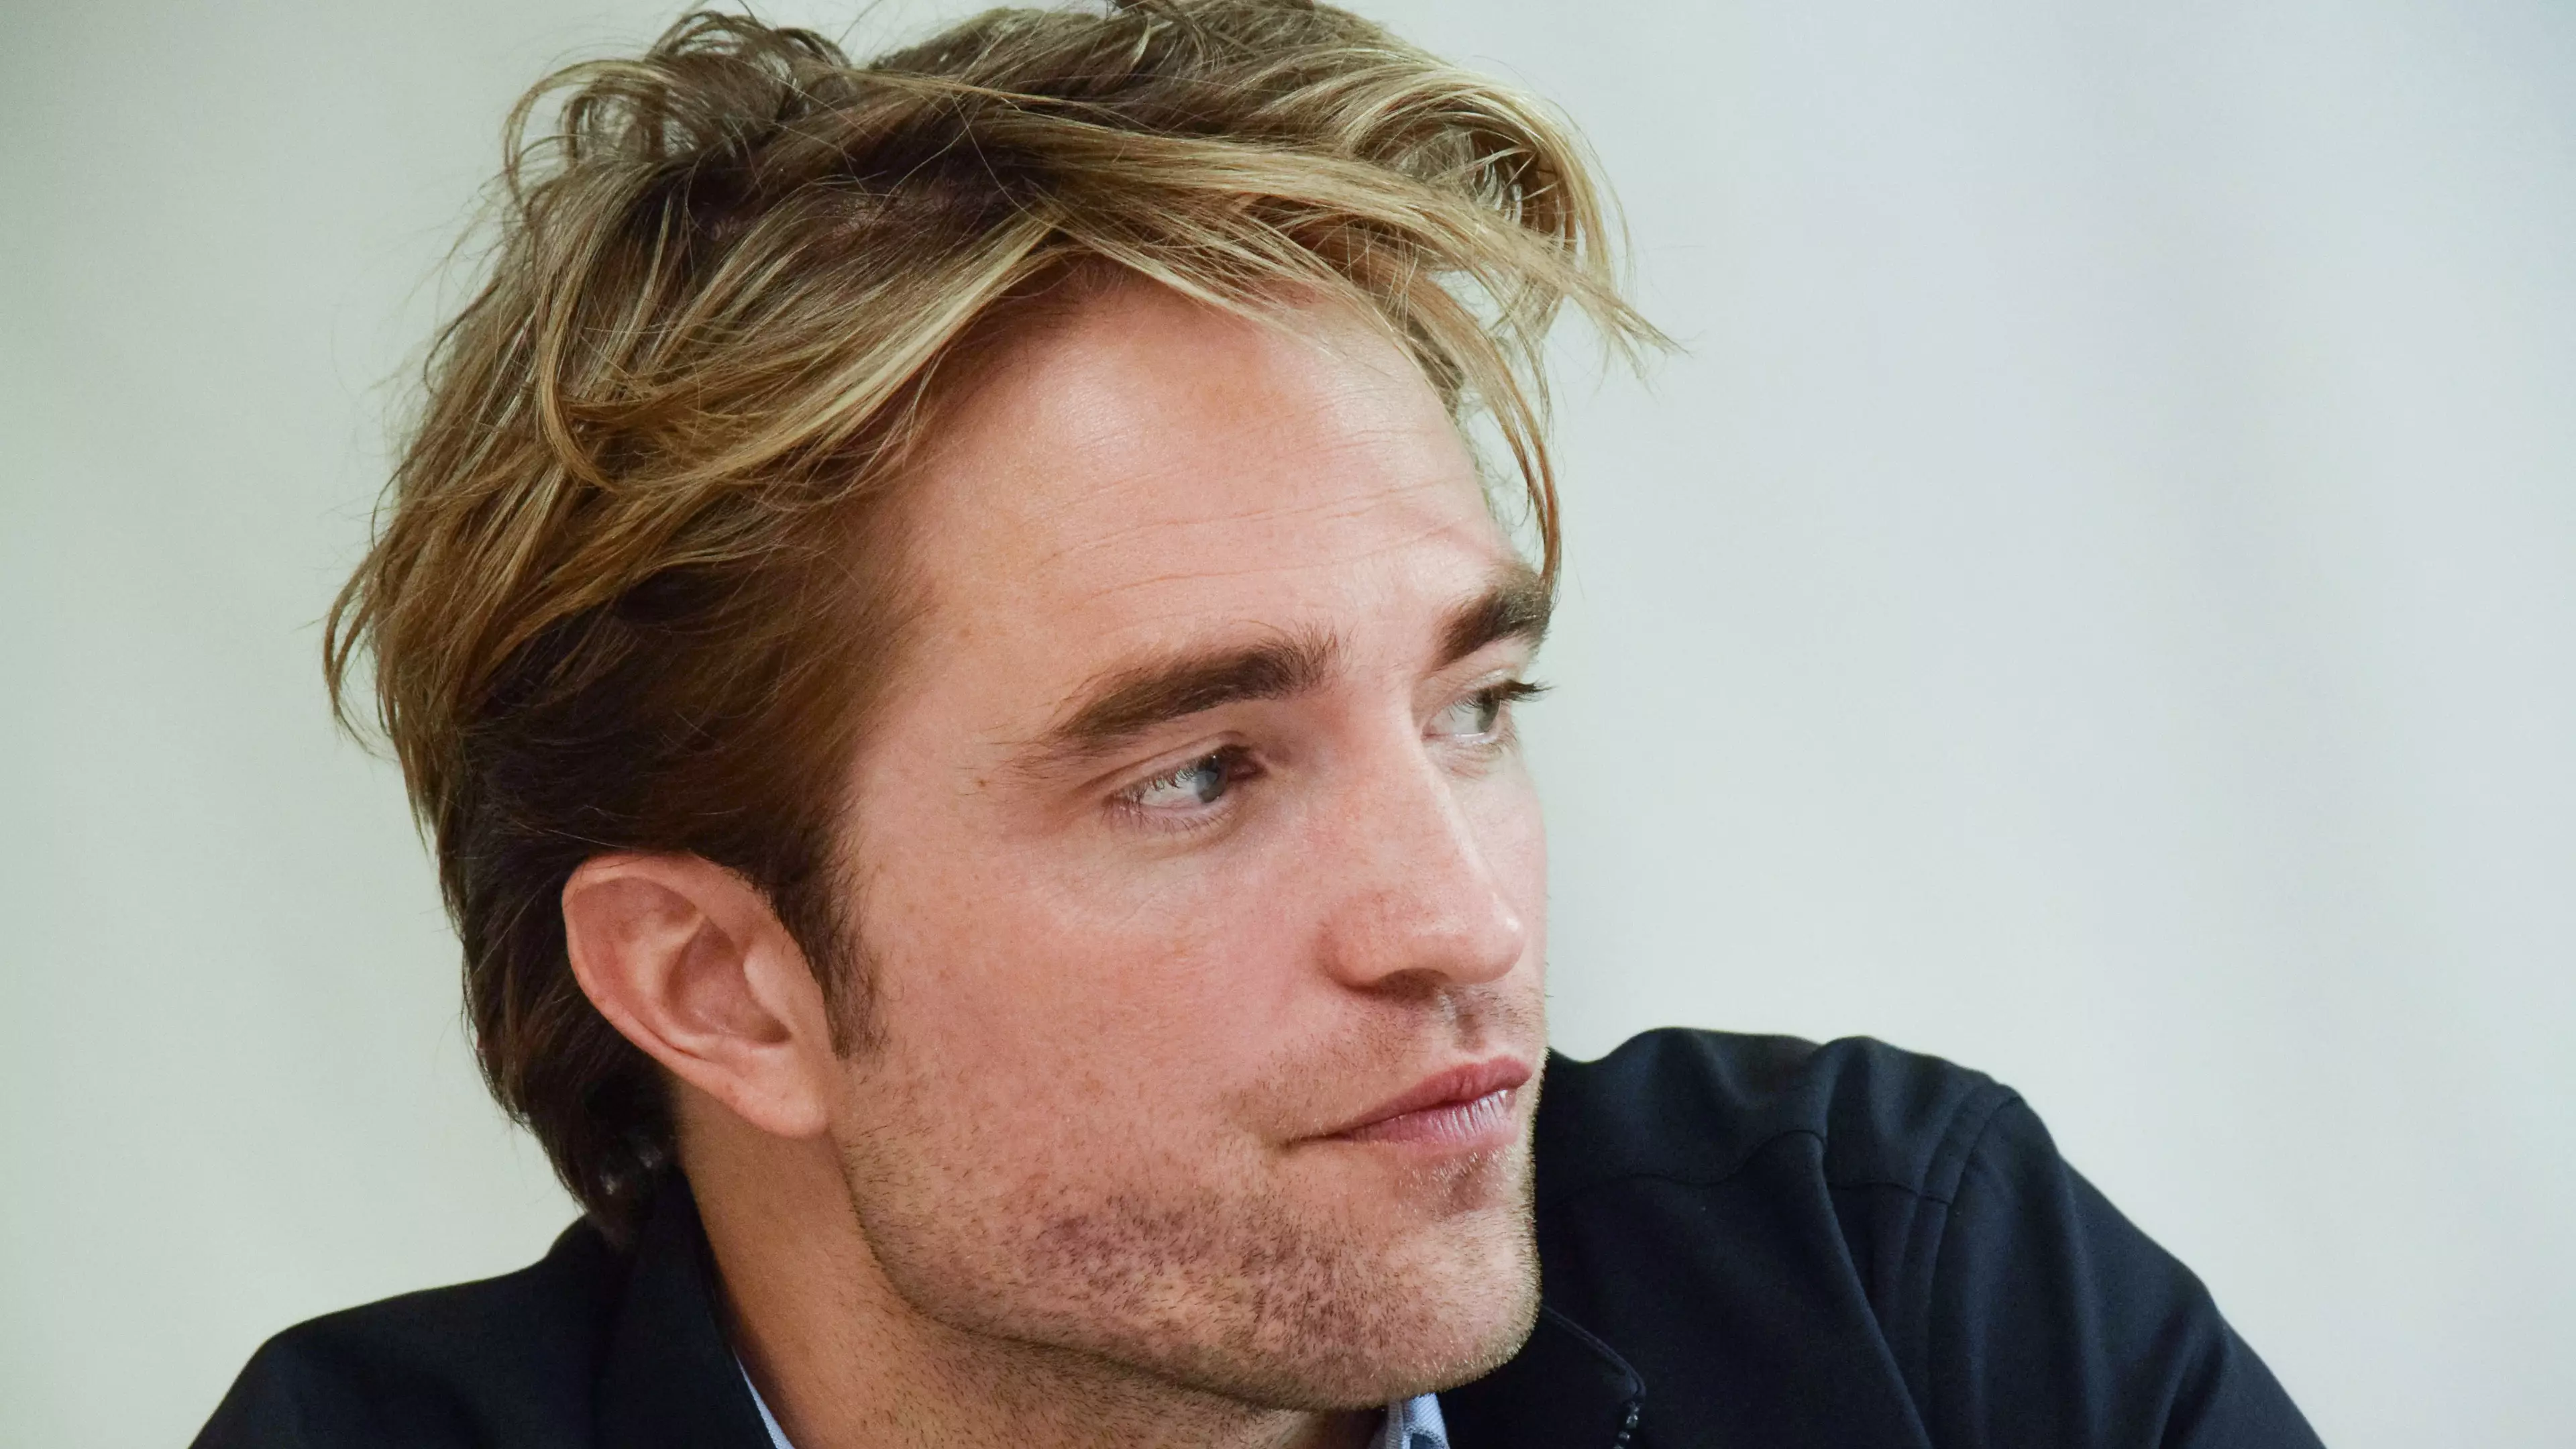 Robert Pattinson Refused To Perform Sex Act On A Dog When Filming Good Time